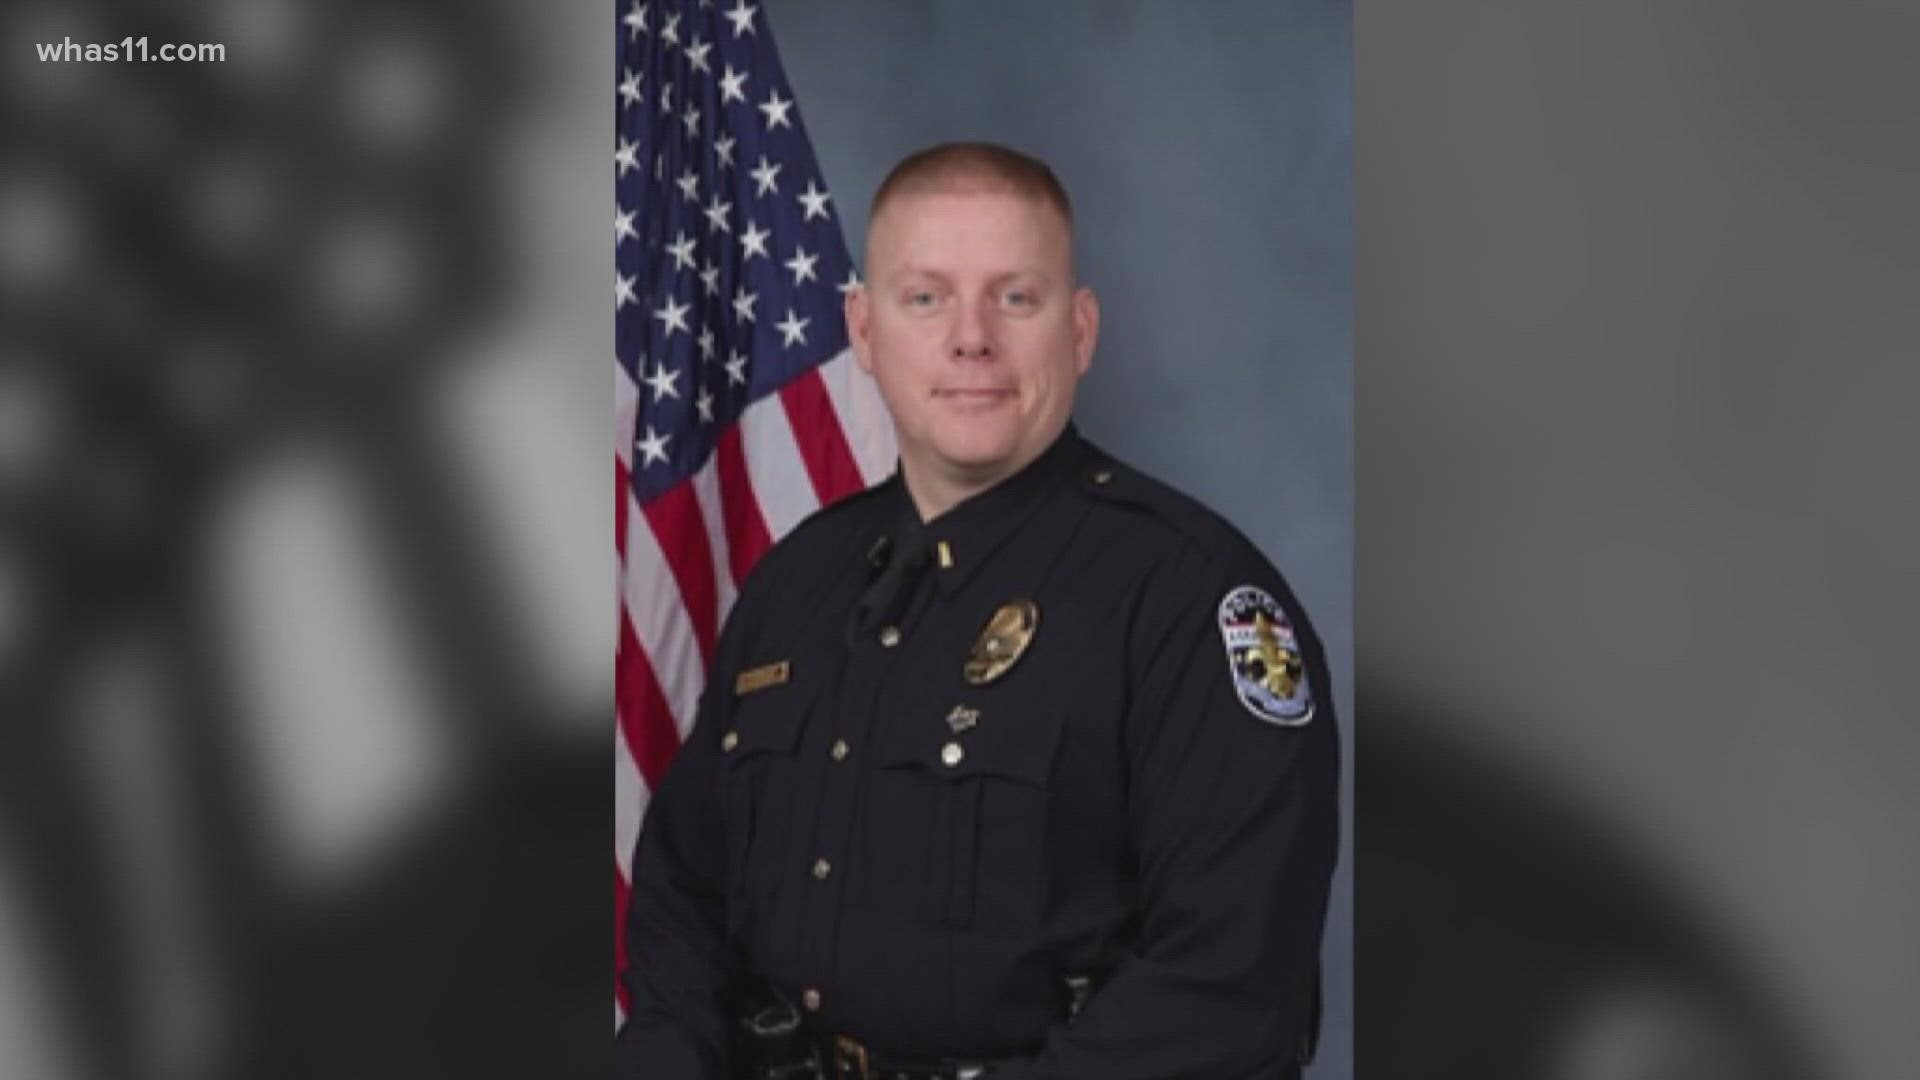 A former LMPD commander demoted for using a racial slur is now suing the department.